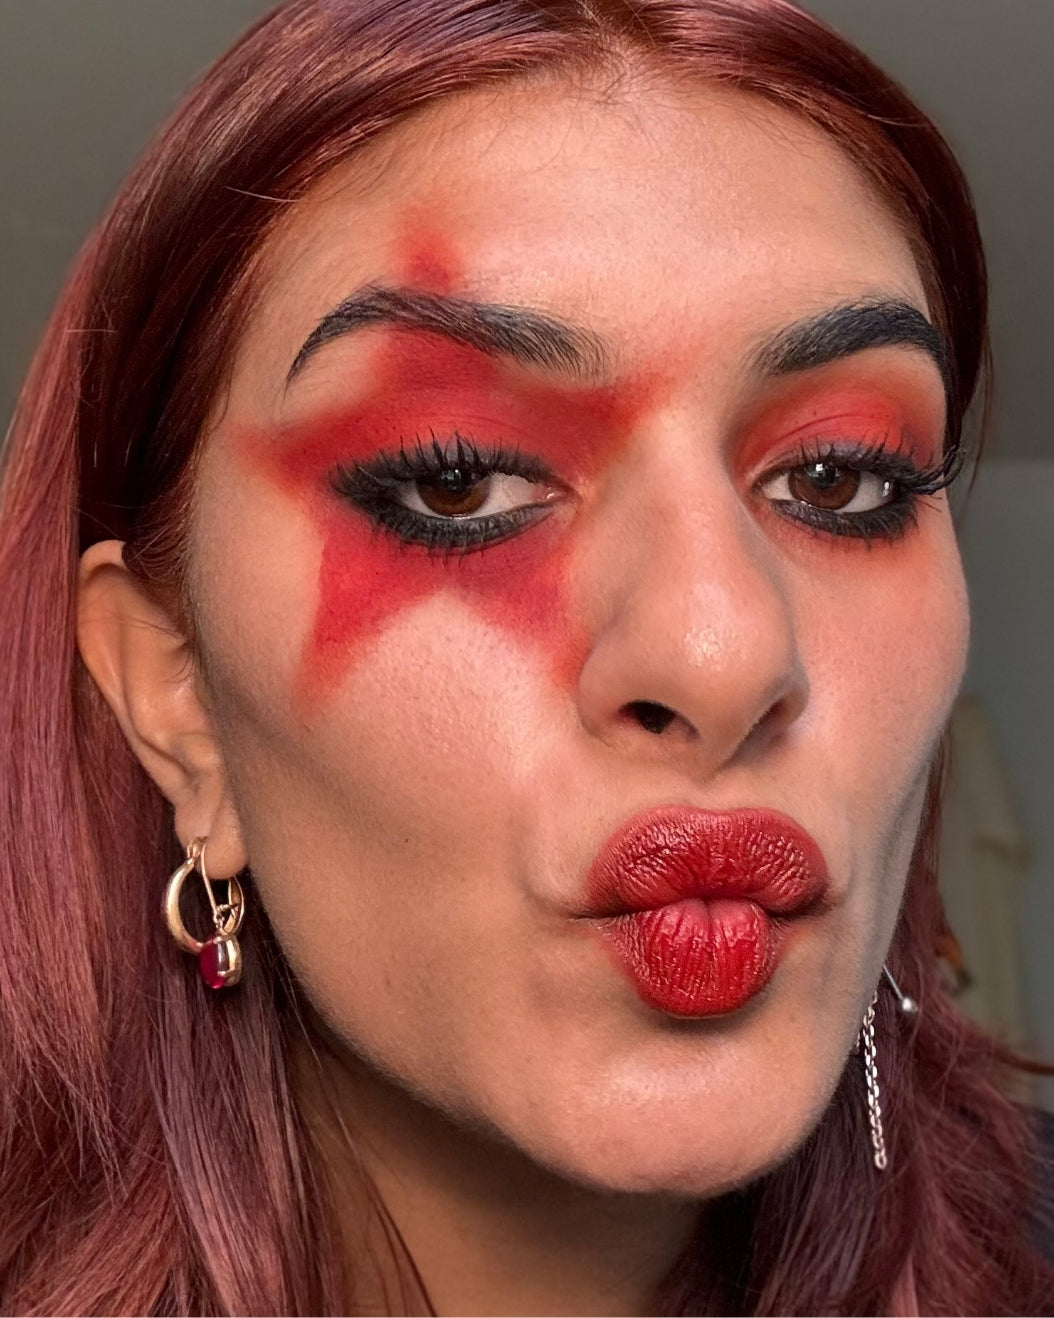 Model wears red star eye makeup and matching red lipstick